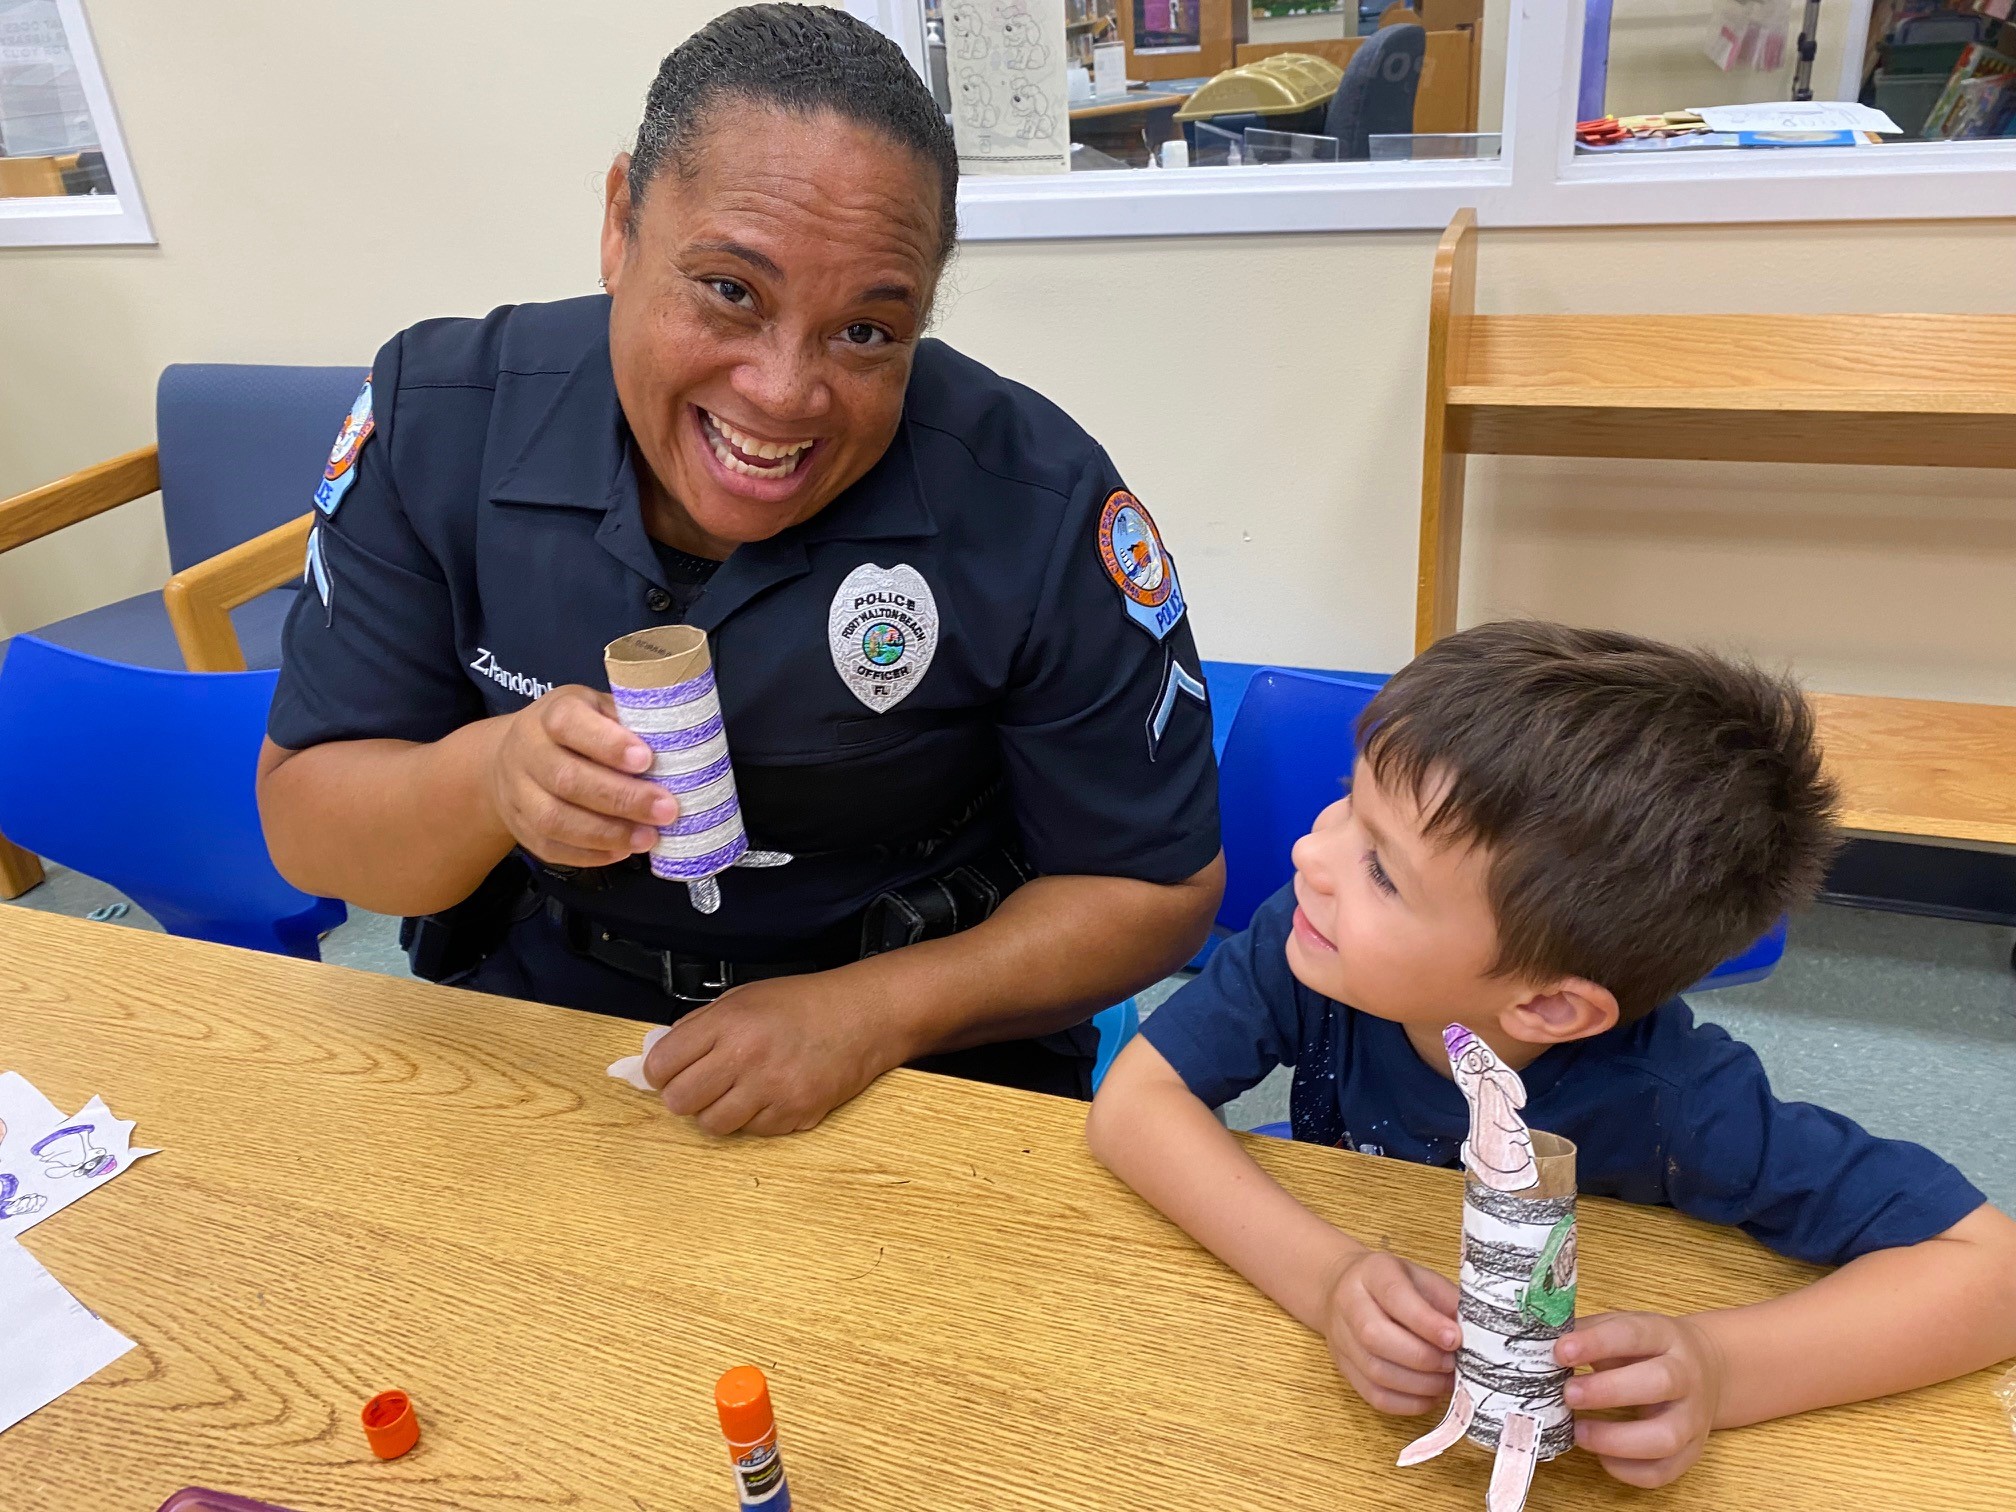 A cop shows off her craft while a child sits next to her and looks on. 